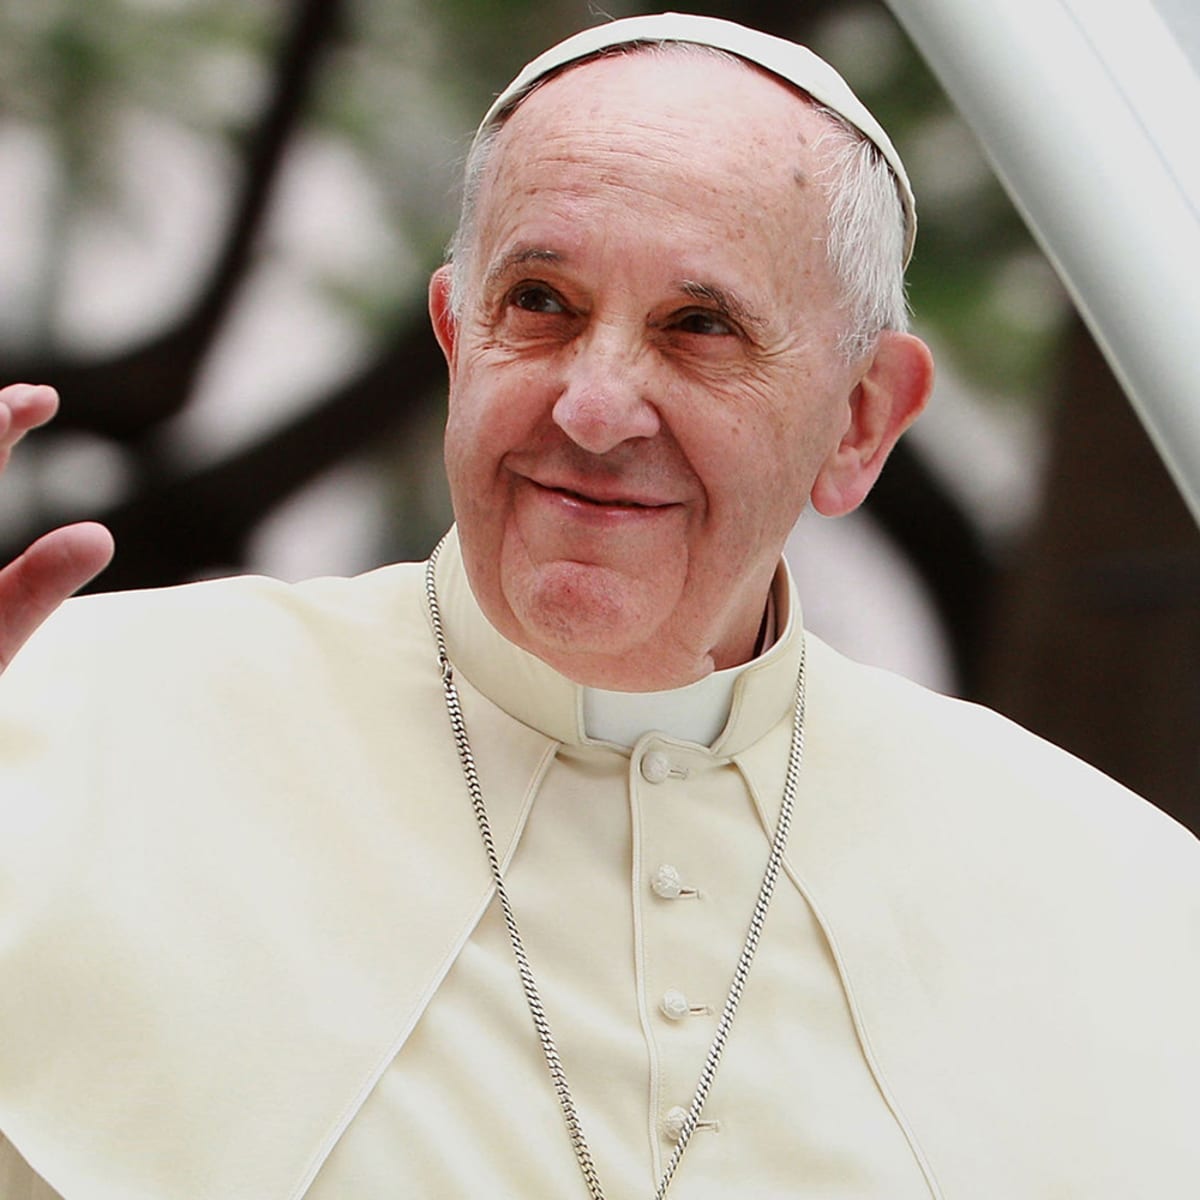 pope-francis-gettyimages-461608174.jpg